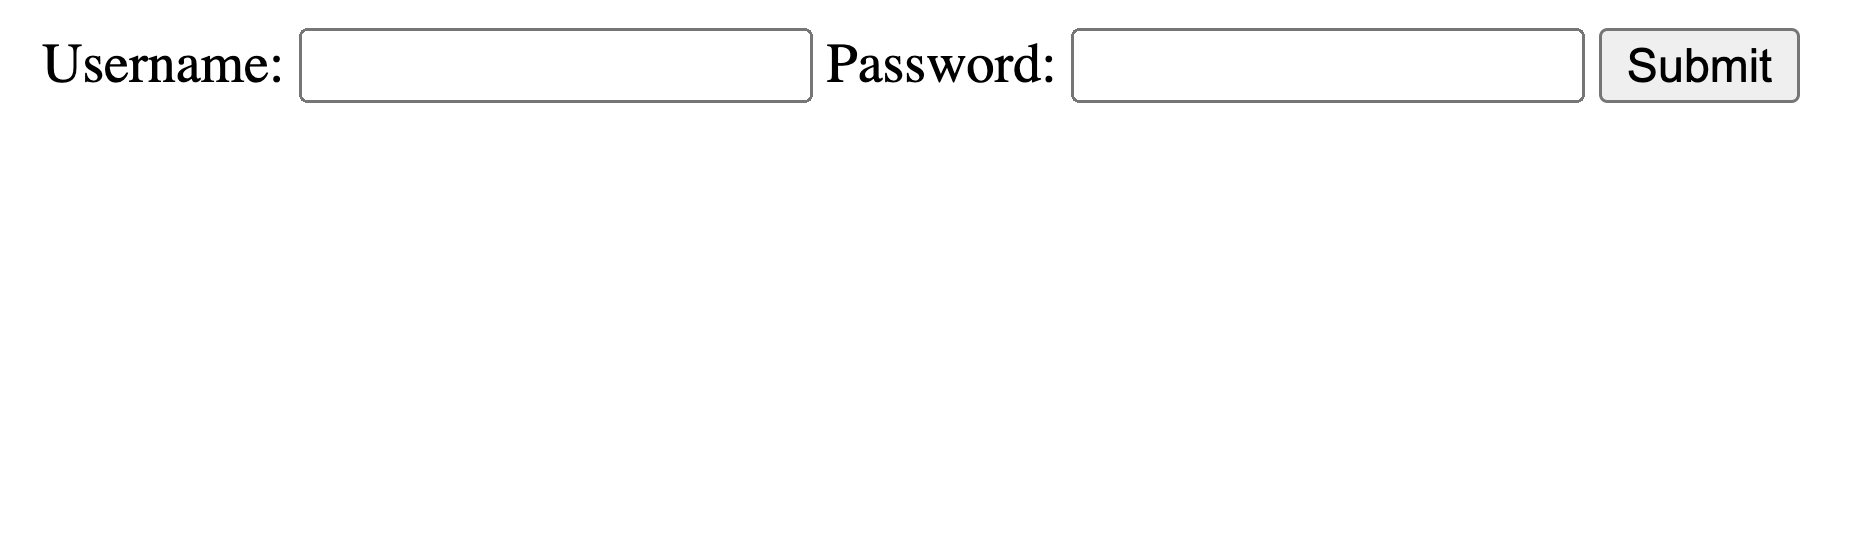 Simple form with fields for username and password and a submit button